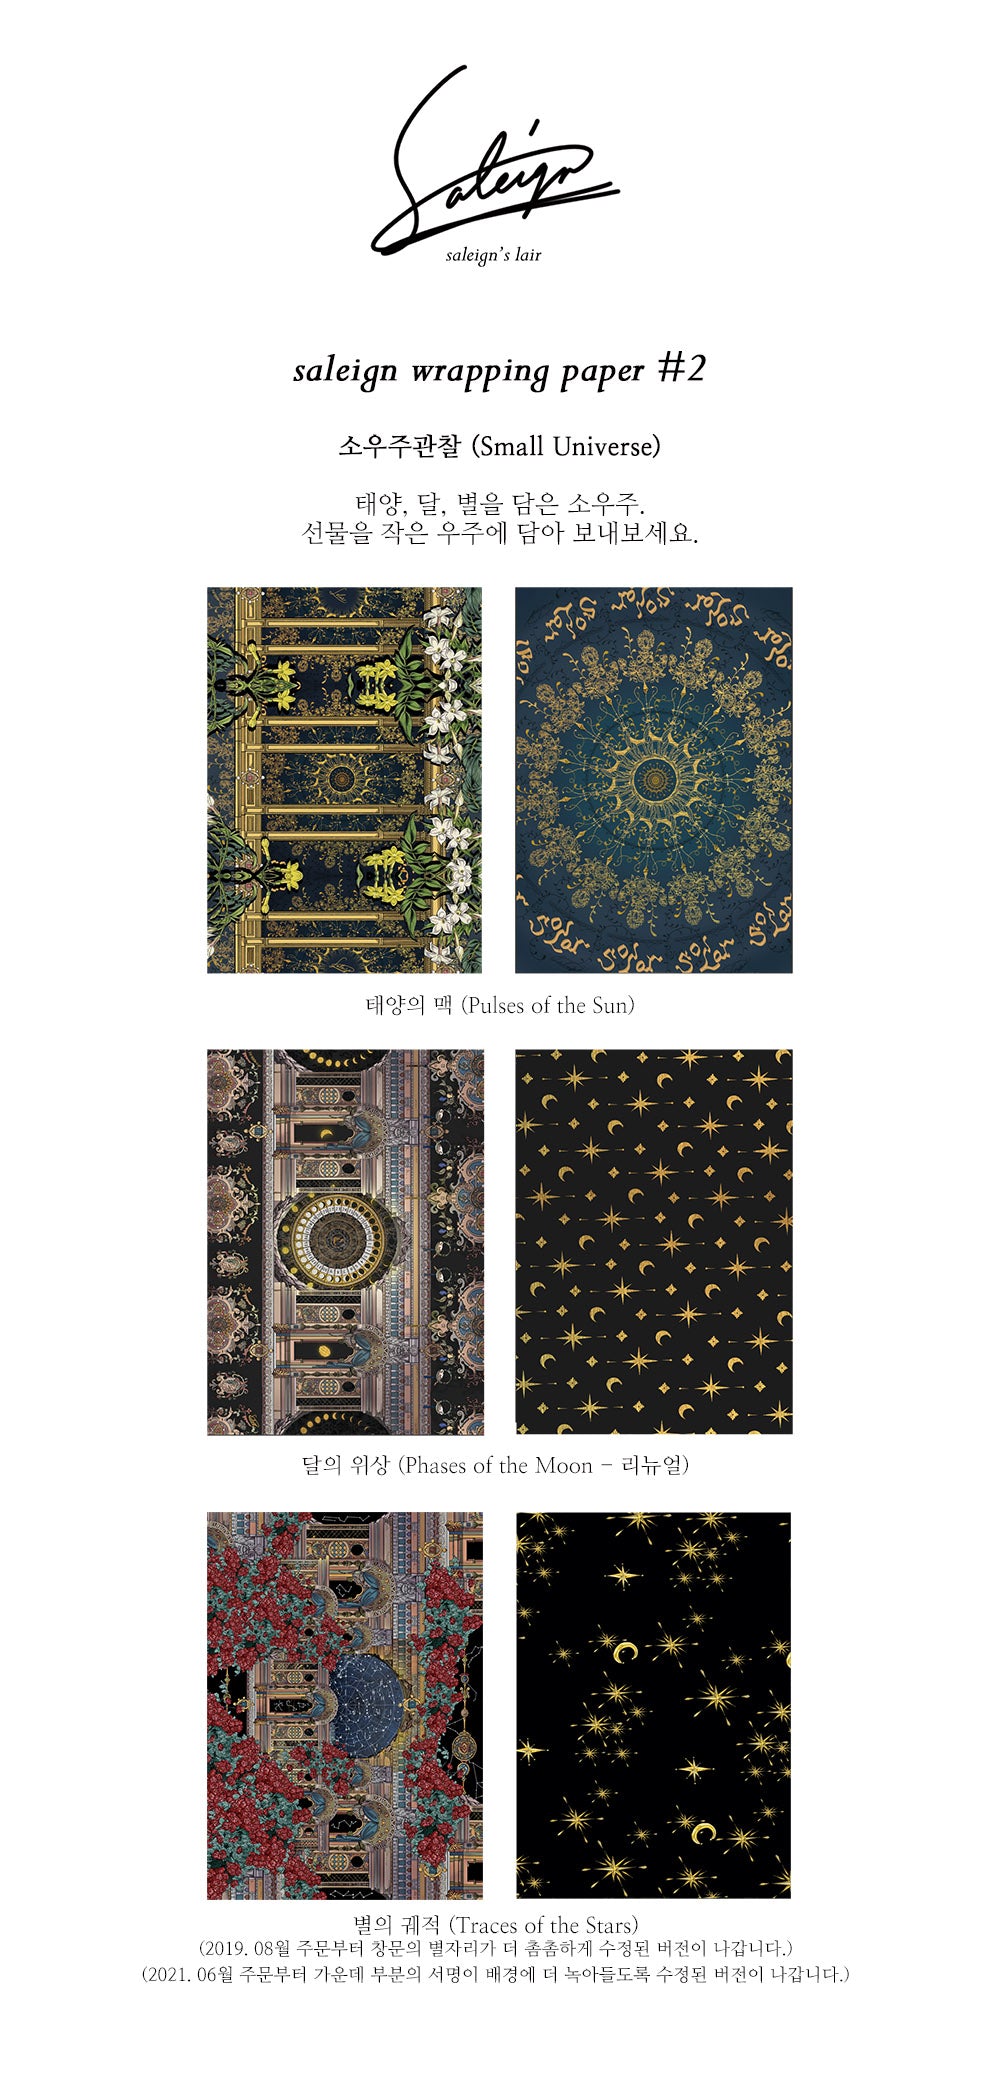 Saleign's Lair Wrapping Paper: Small Universe